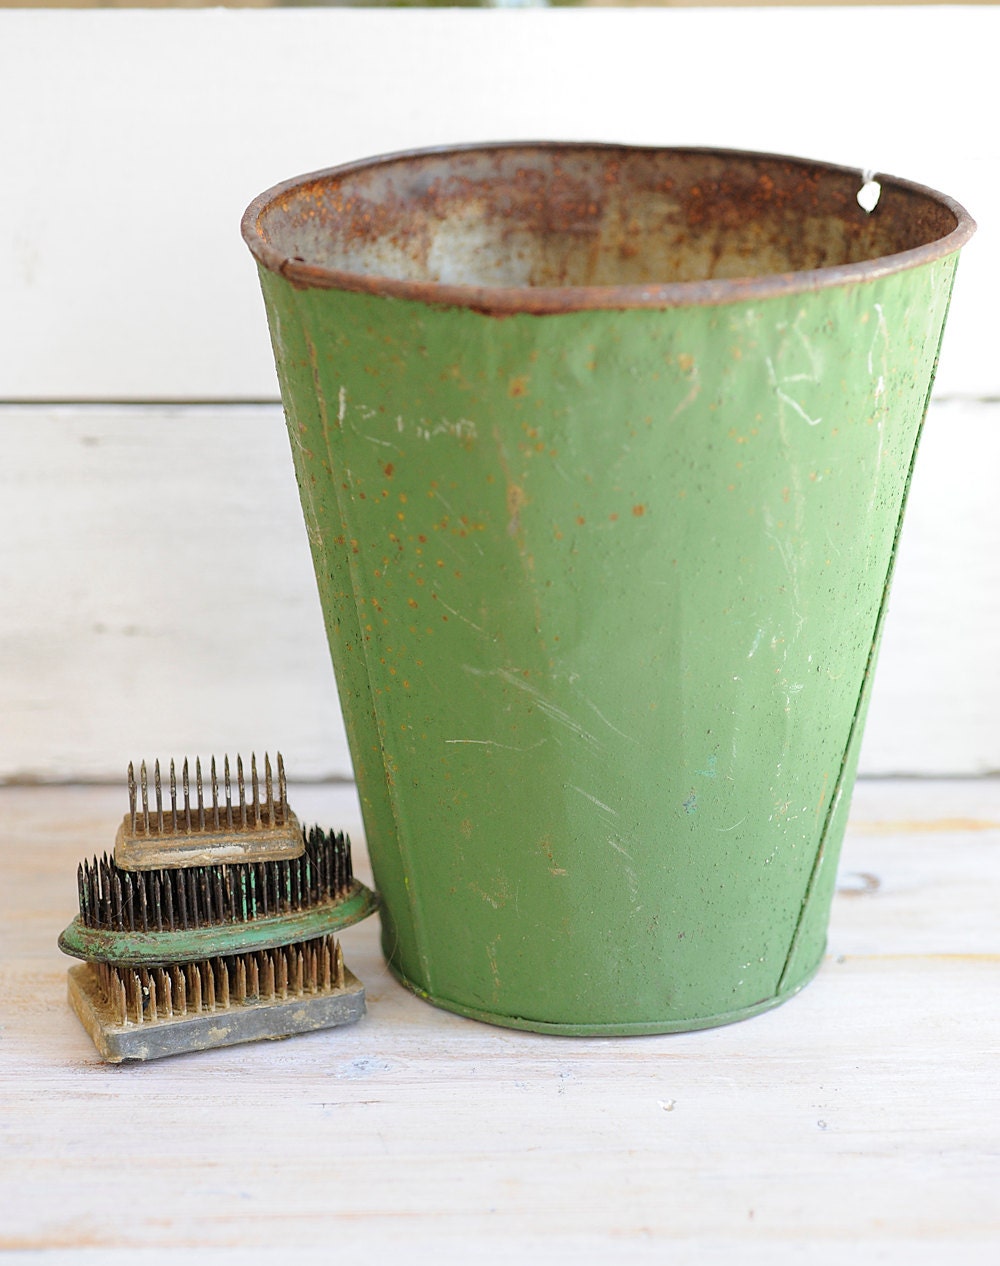 vintage, metal, green, country decor, rustic decor, maple syrup, sap bucket